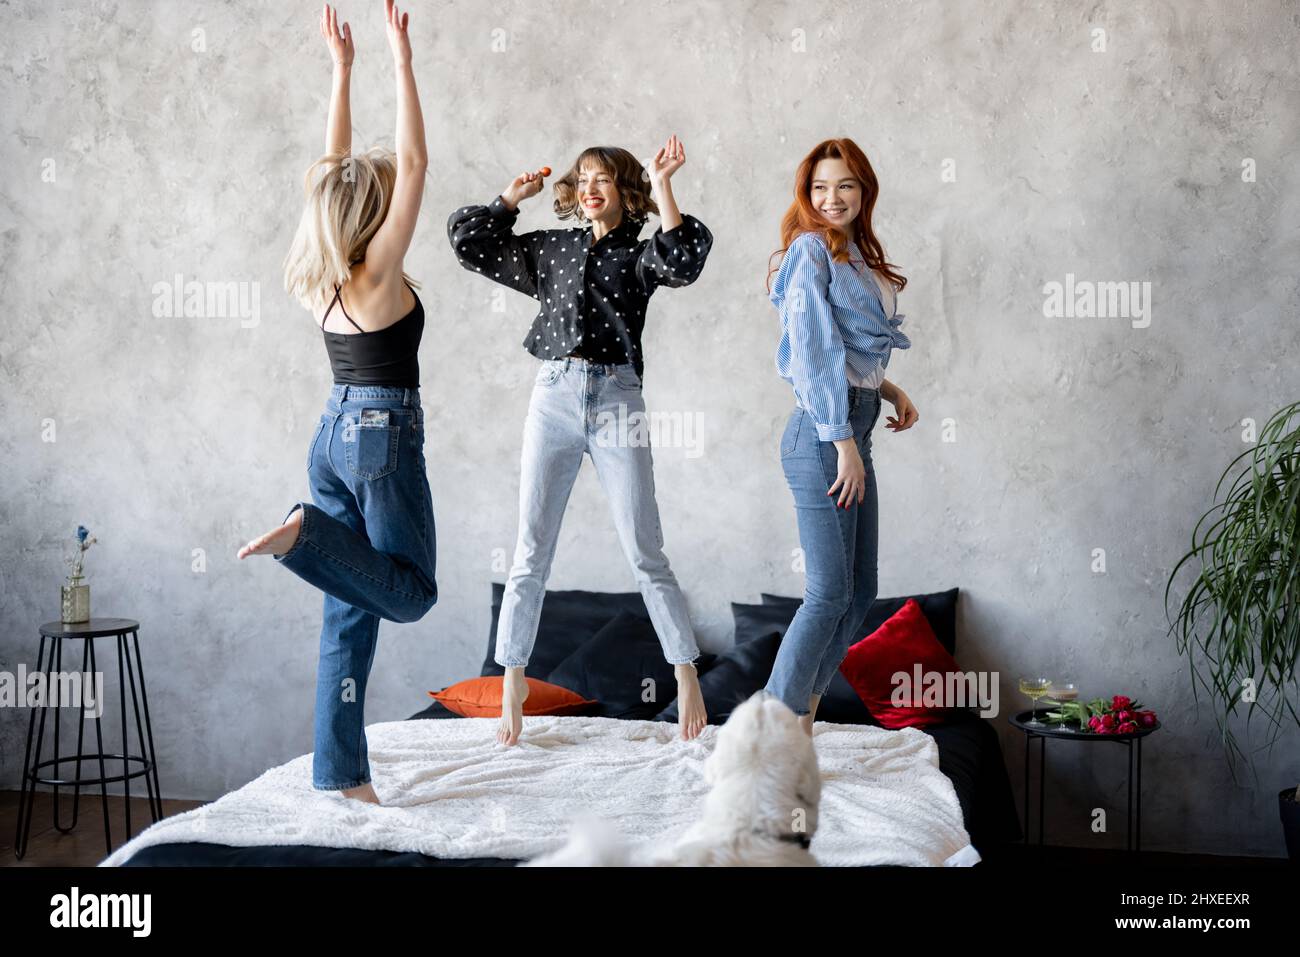 Three young adult girlfriends dressed casual having fun, jumping together on bed. Caucasian women celebrating and having a party at home. Concept of female friendship, beauty and happiness Stock Photo